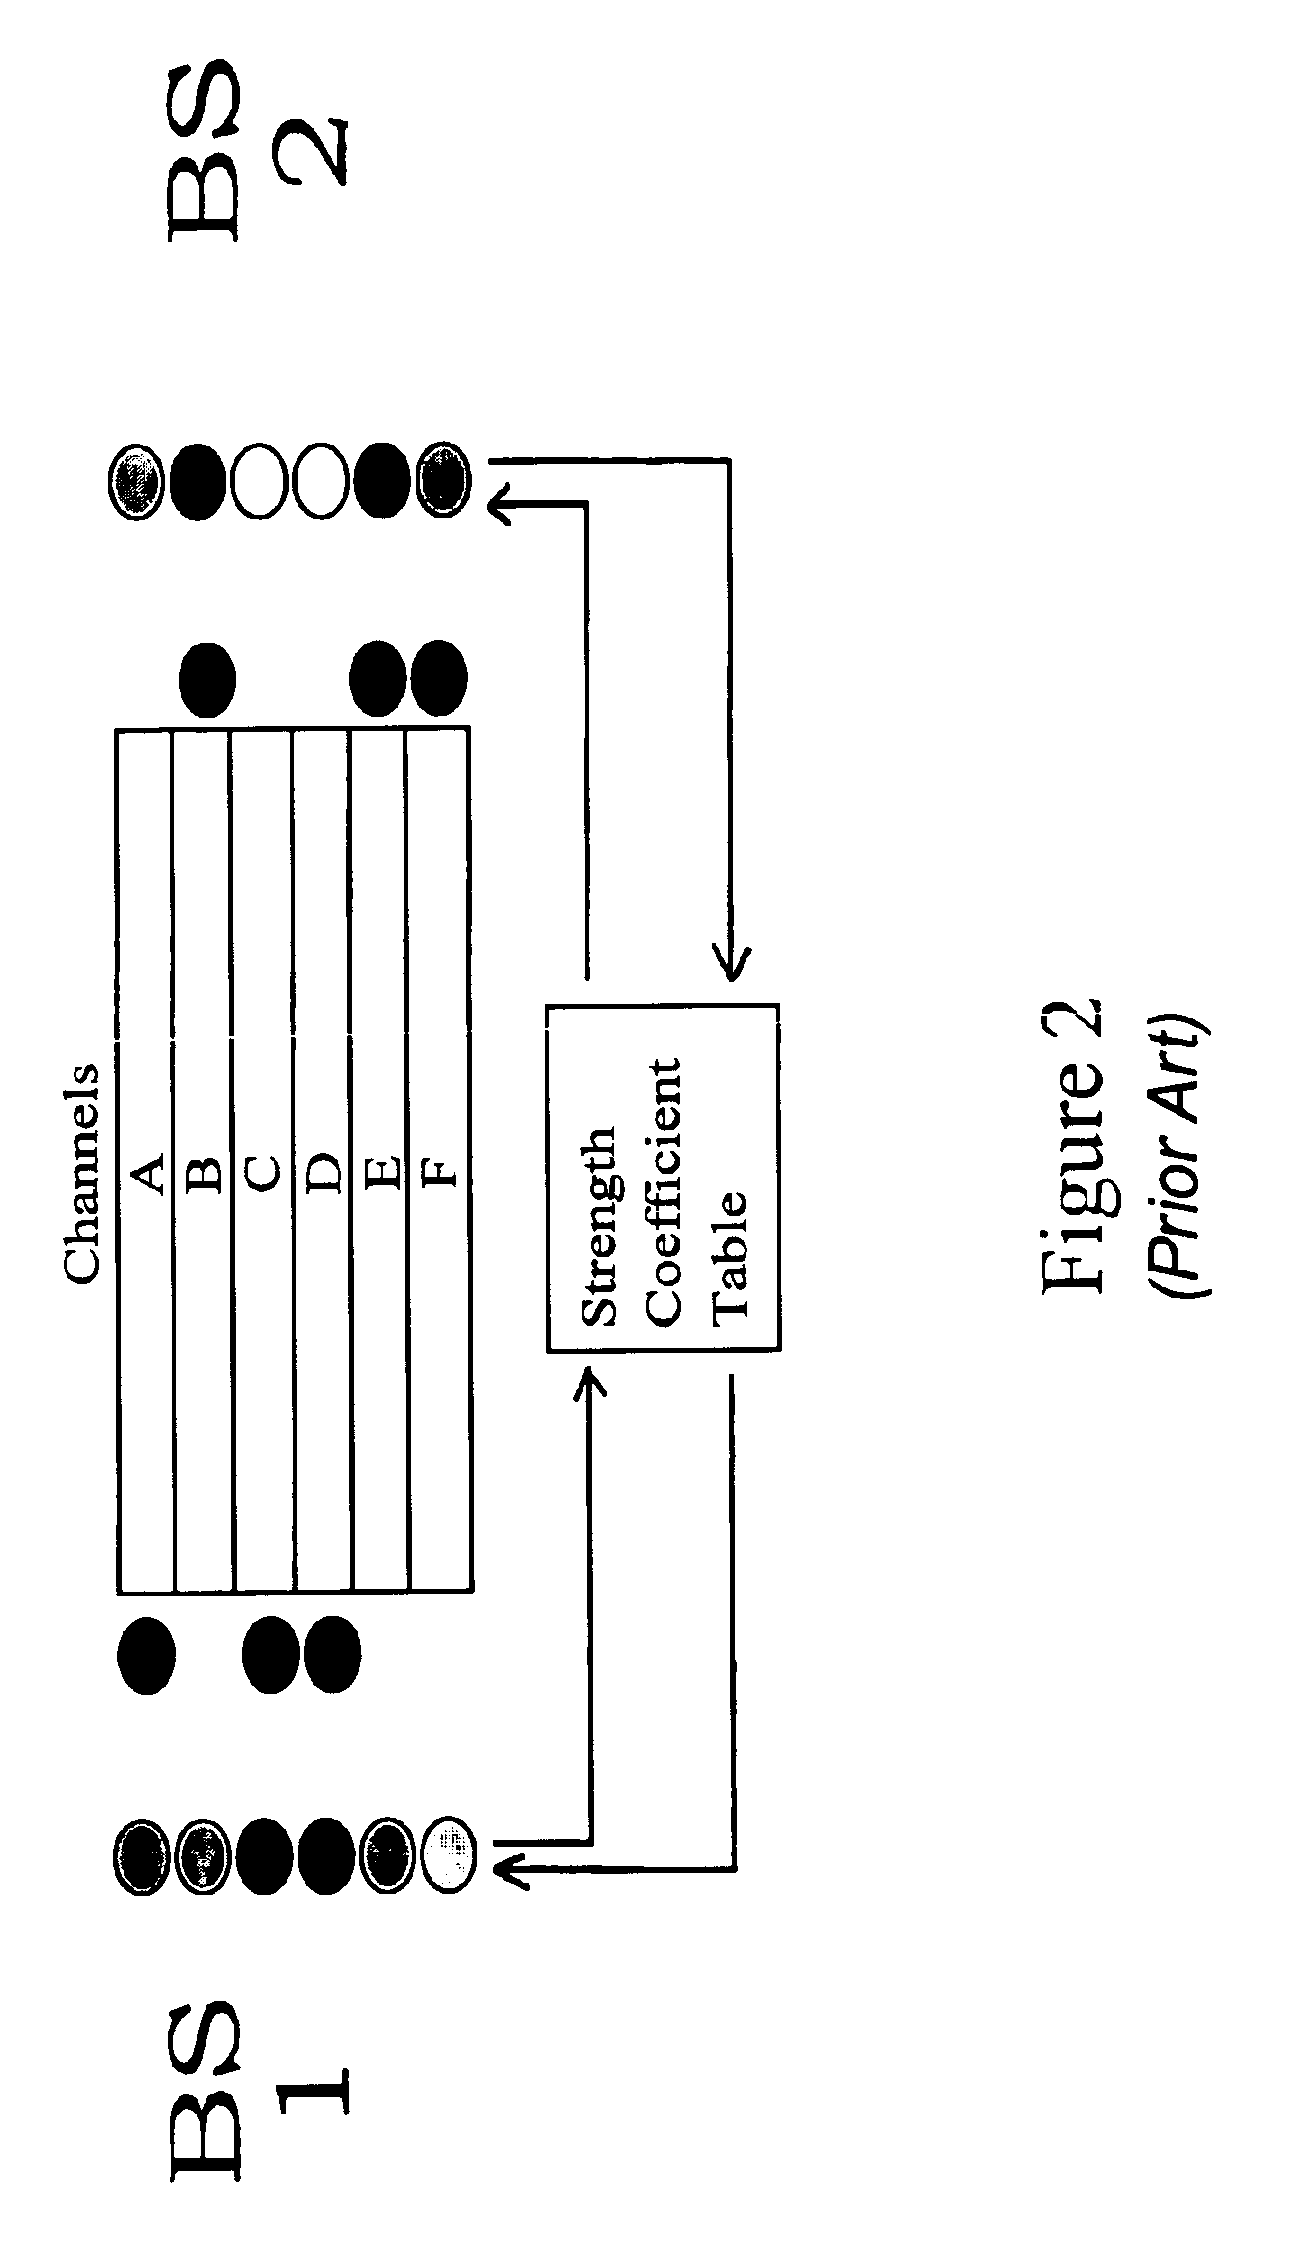 Allocation of channels to radio transceivers